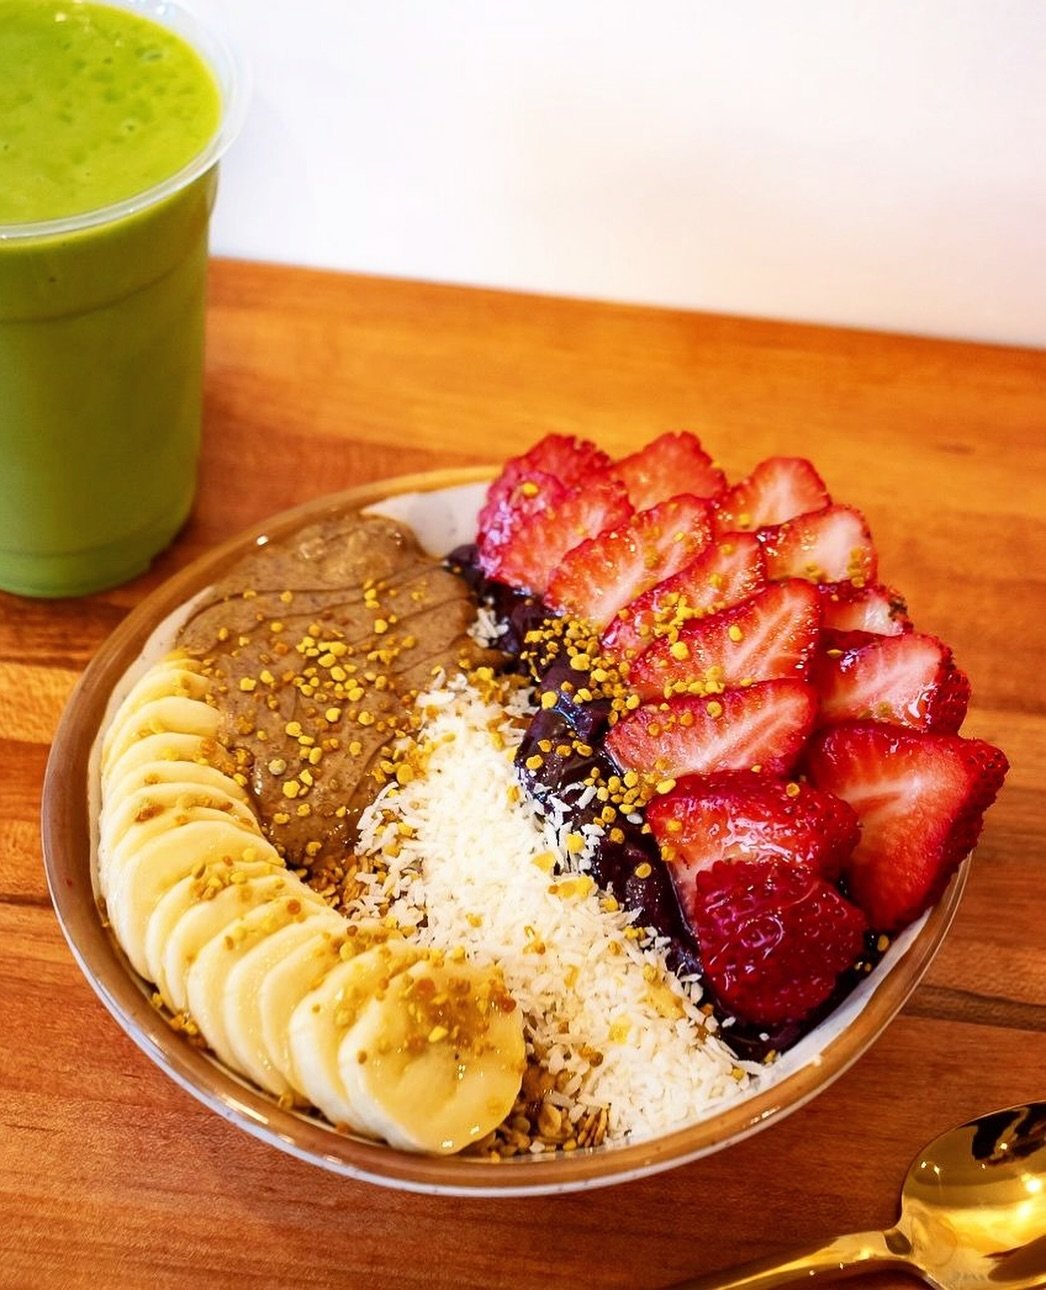 THE FRESHIES BOWL⁠
✹⁠
Made with our own special a&ccedil;a&iacute; blend, topped with a bright and juicy serving of strawberries, sweet banana, gooey almond butter, fresh coconut flakes, energy-boosting and antioxidant-dense bee pollen, and sticky dr